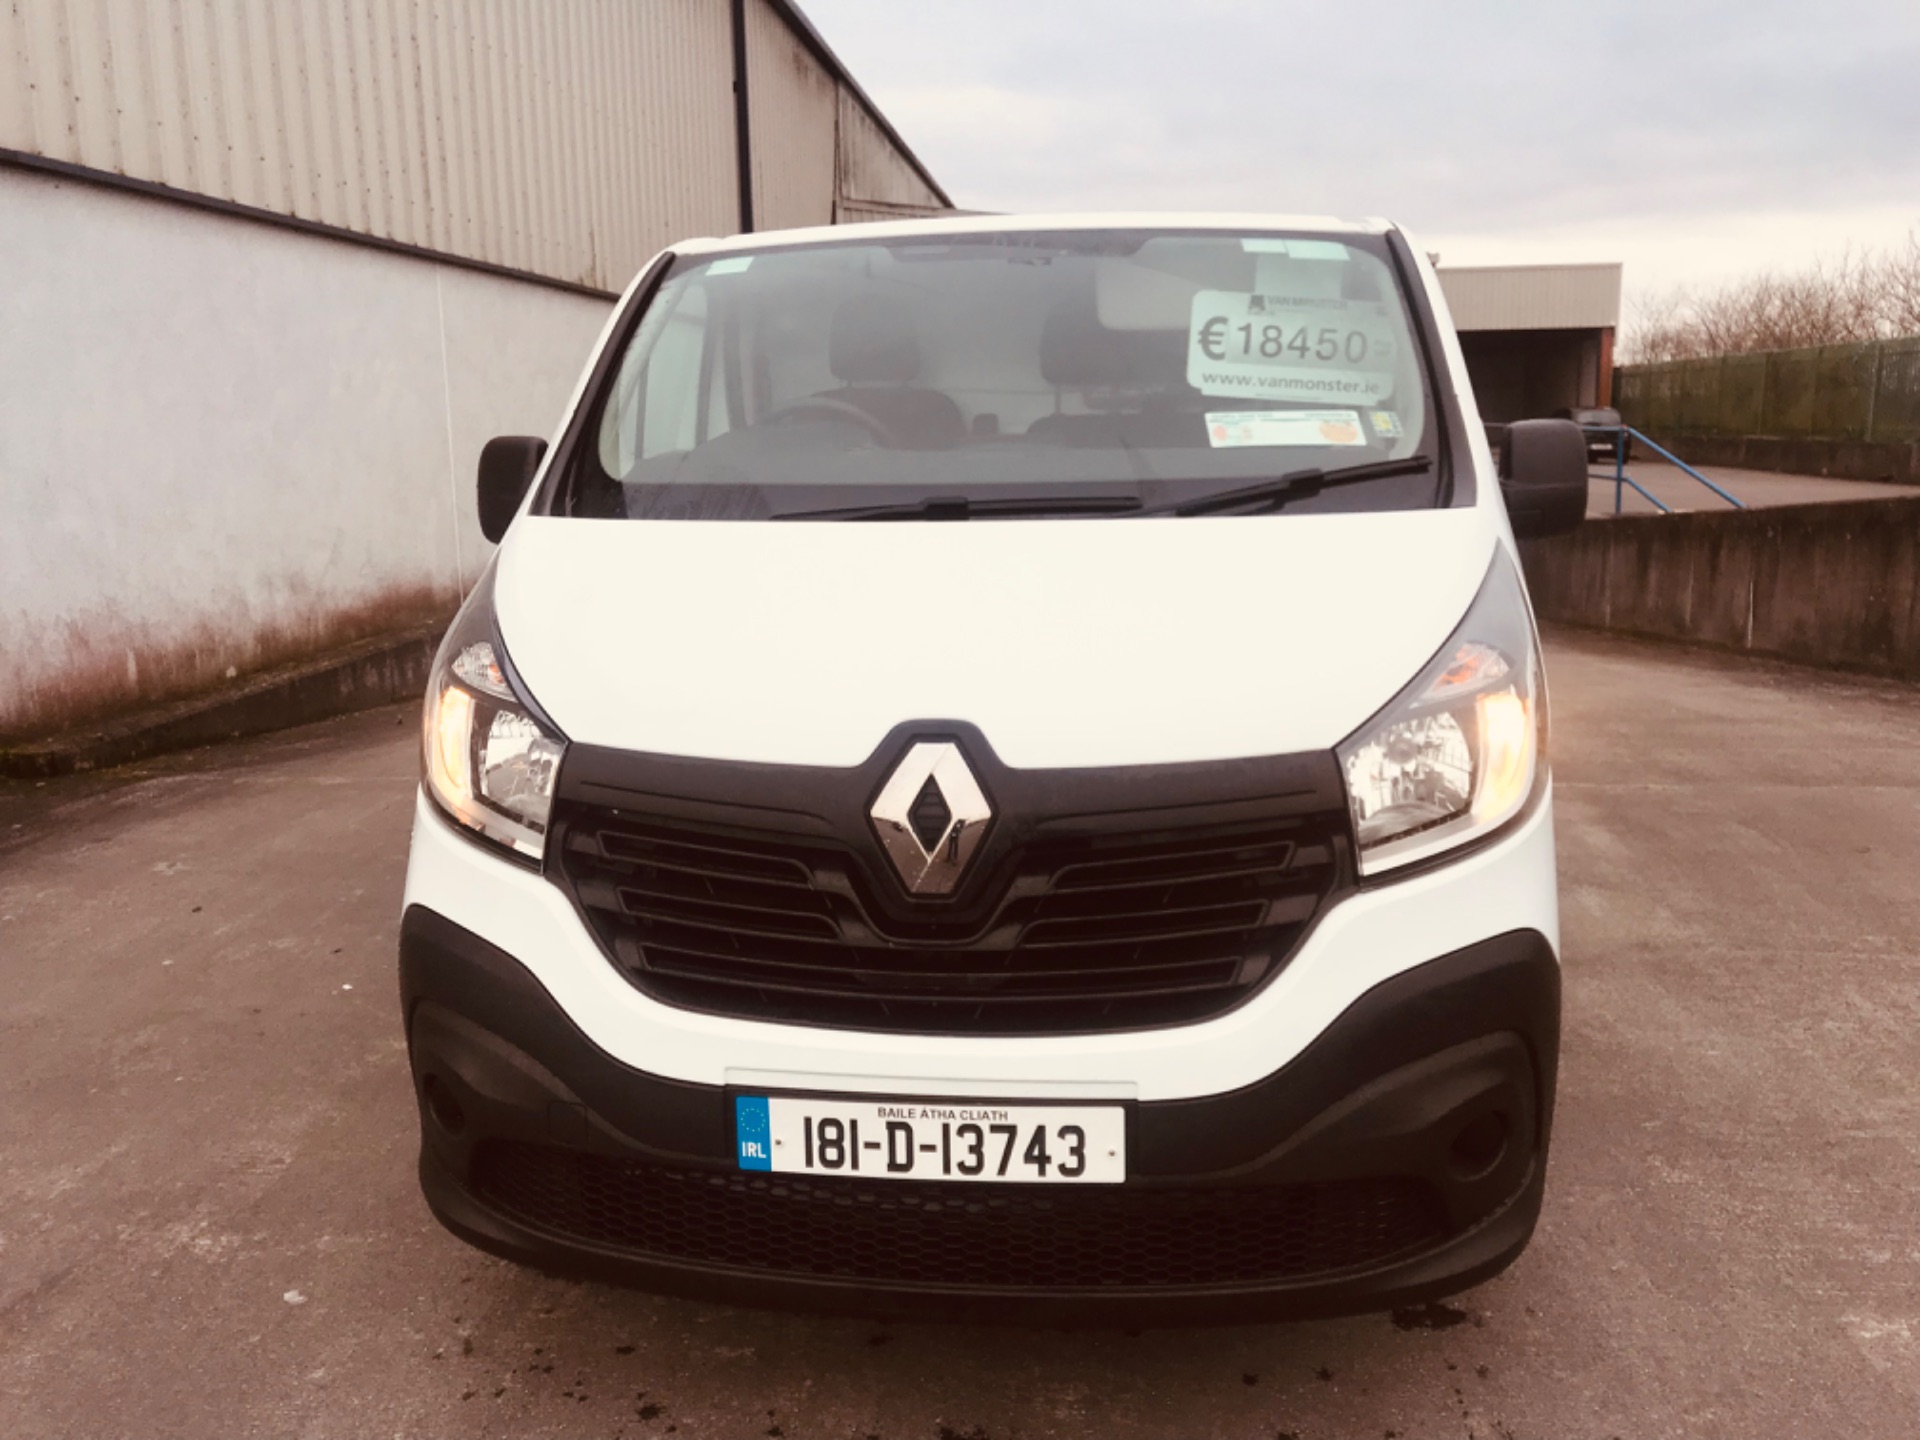 2018 Renault Trafic LL29 DCI 120 Business 3DR (181D13743) Image 2